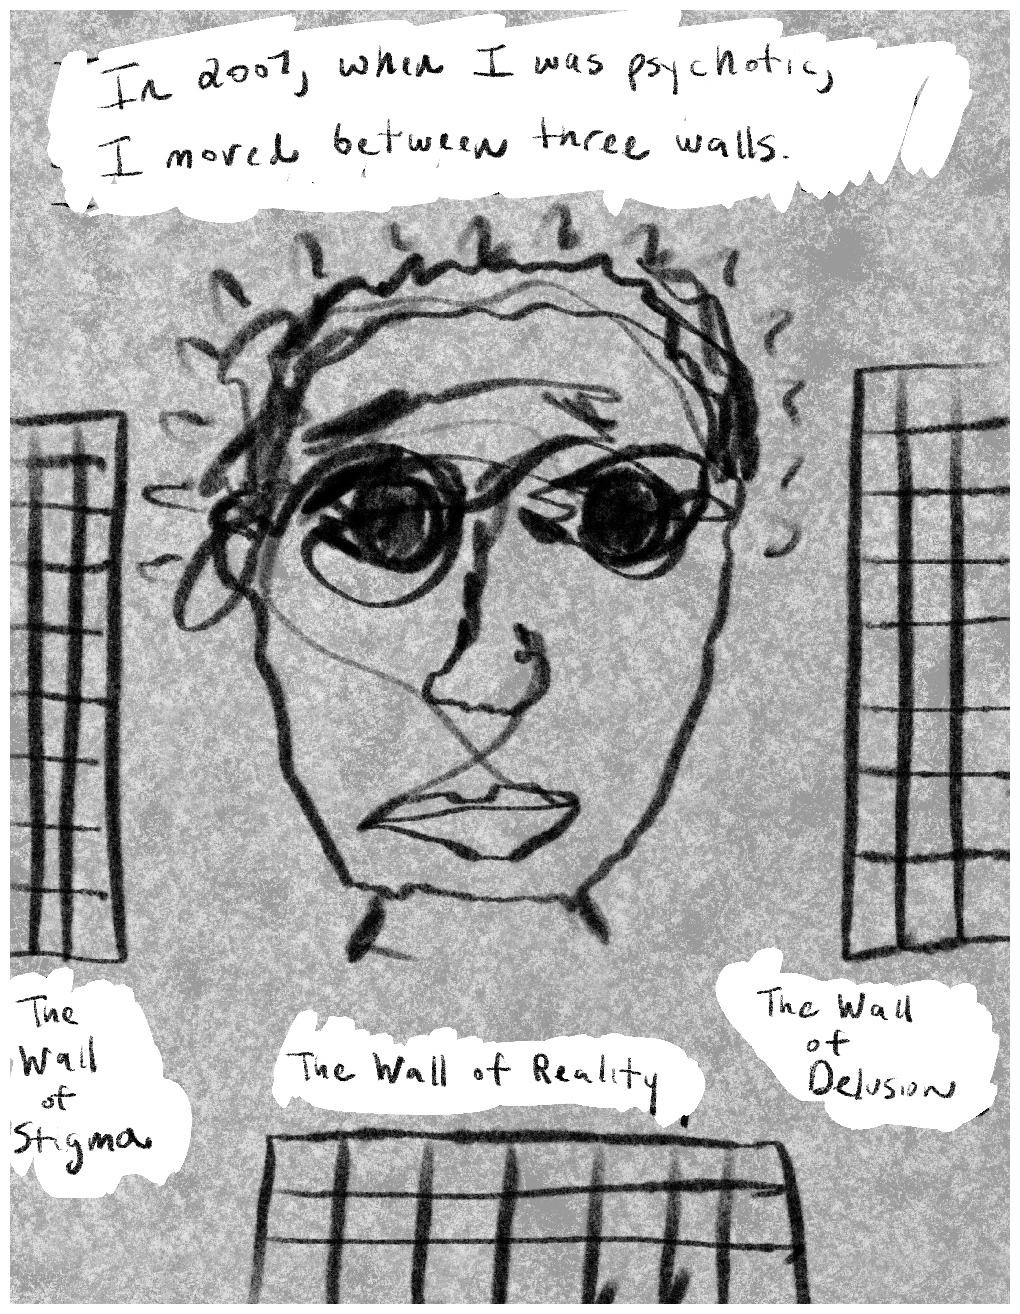 Panel 1 of a six-panel comic called 'Walled in by psychosis', consisting of thick black line drawing on a mottled grey background. A crudely drawn head with large circular black disc-like eyes fills most of the panel, staring out at the viewer with a blank expression. To the right, left and below the head are rectangular grids, representing walls. A block of text above the head says: "In 2007, when I was psychotic, I moved between three walls”. Text below the left wall says: "The Wall of Stigma". The text below the right wall says: "The Wall of Delusion" and text between the bottom wall and the head says: "The Wall of Reality". 